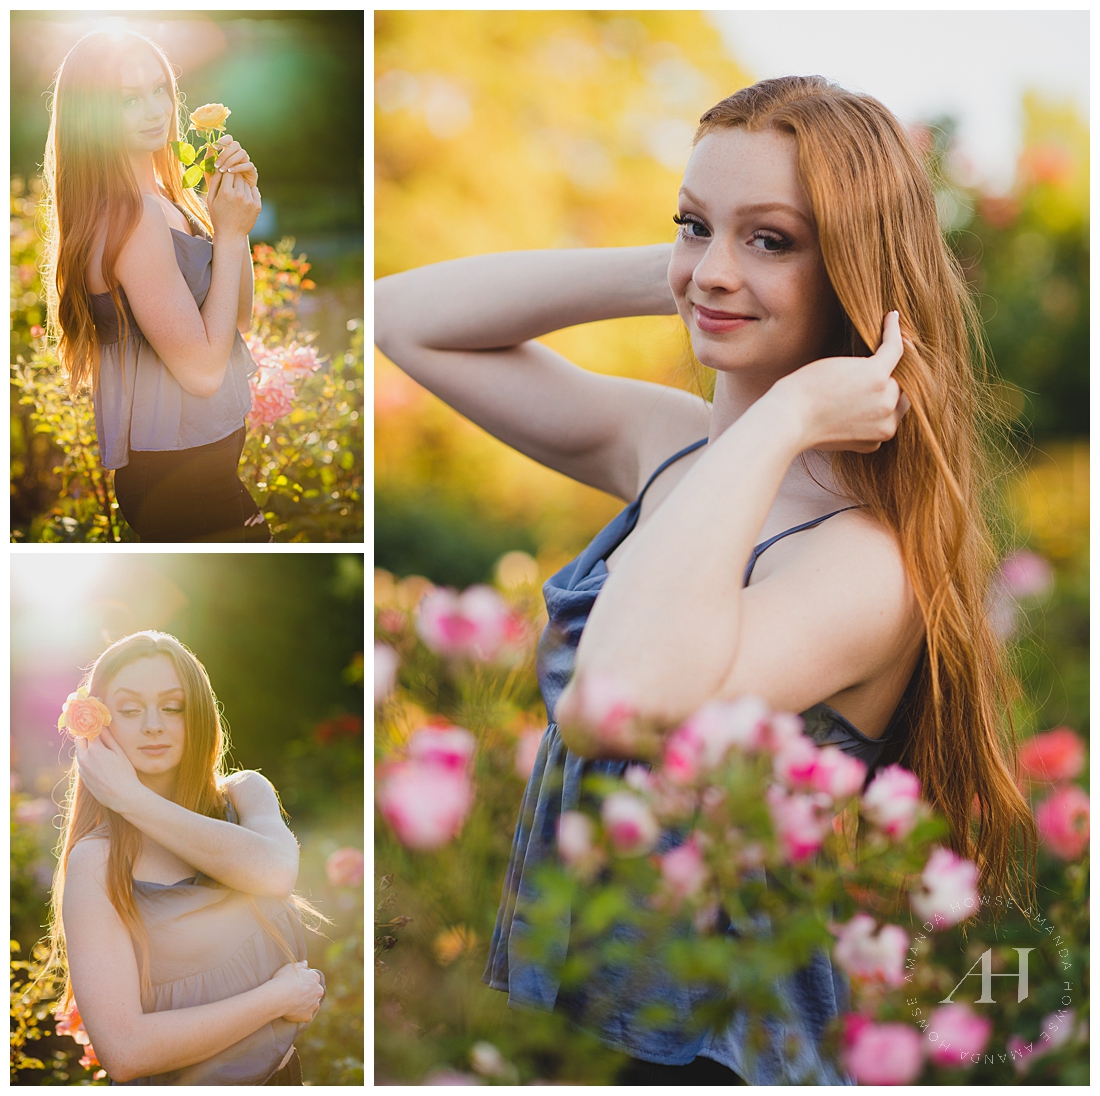 Point Defiance Rose Garden | The Best Spot for Outdoor Senior Portraits, Blooming Flowers for Senior Portraits, Garden Portraits, Summer Outfit Inspo | Amanda Howse Photography | Photographed by Tacoma's Best Senior Portrait Photographer 